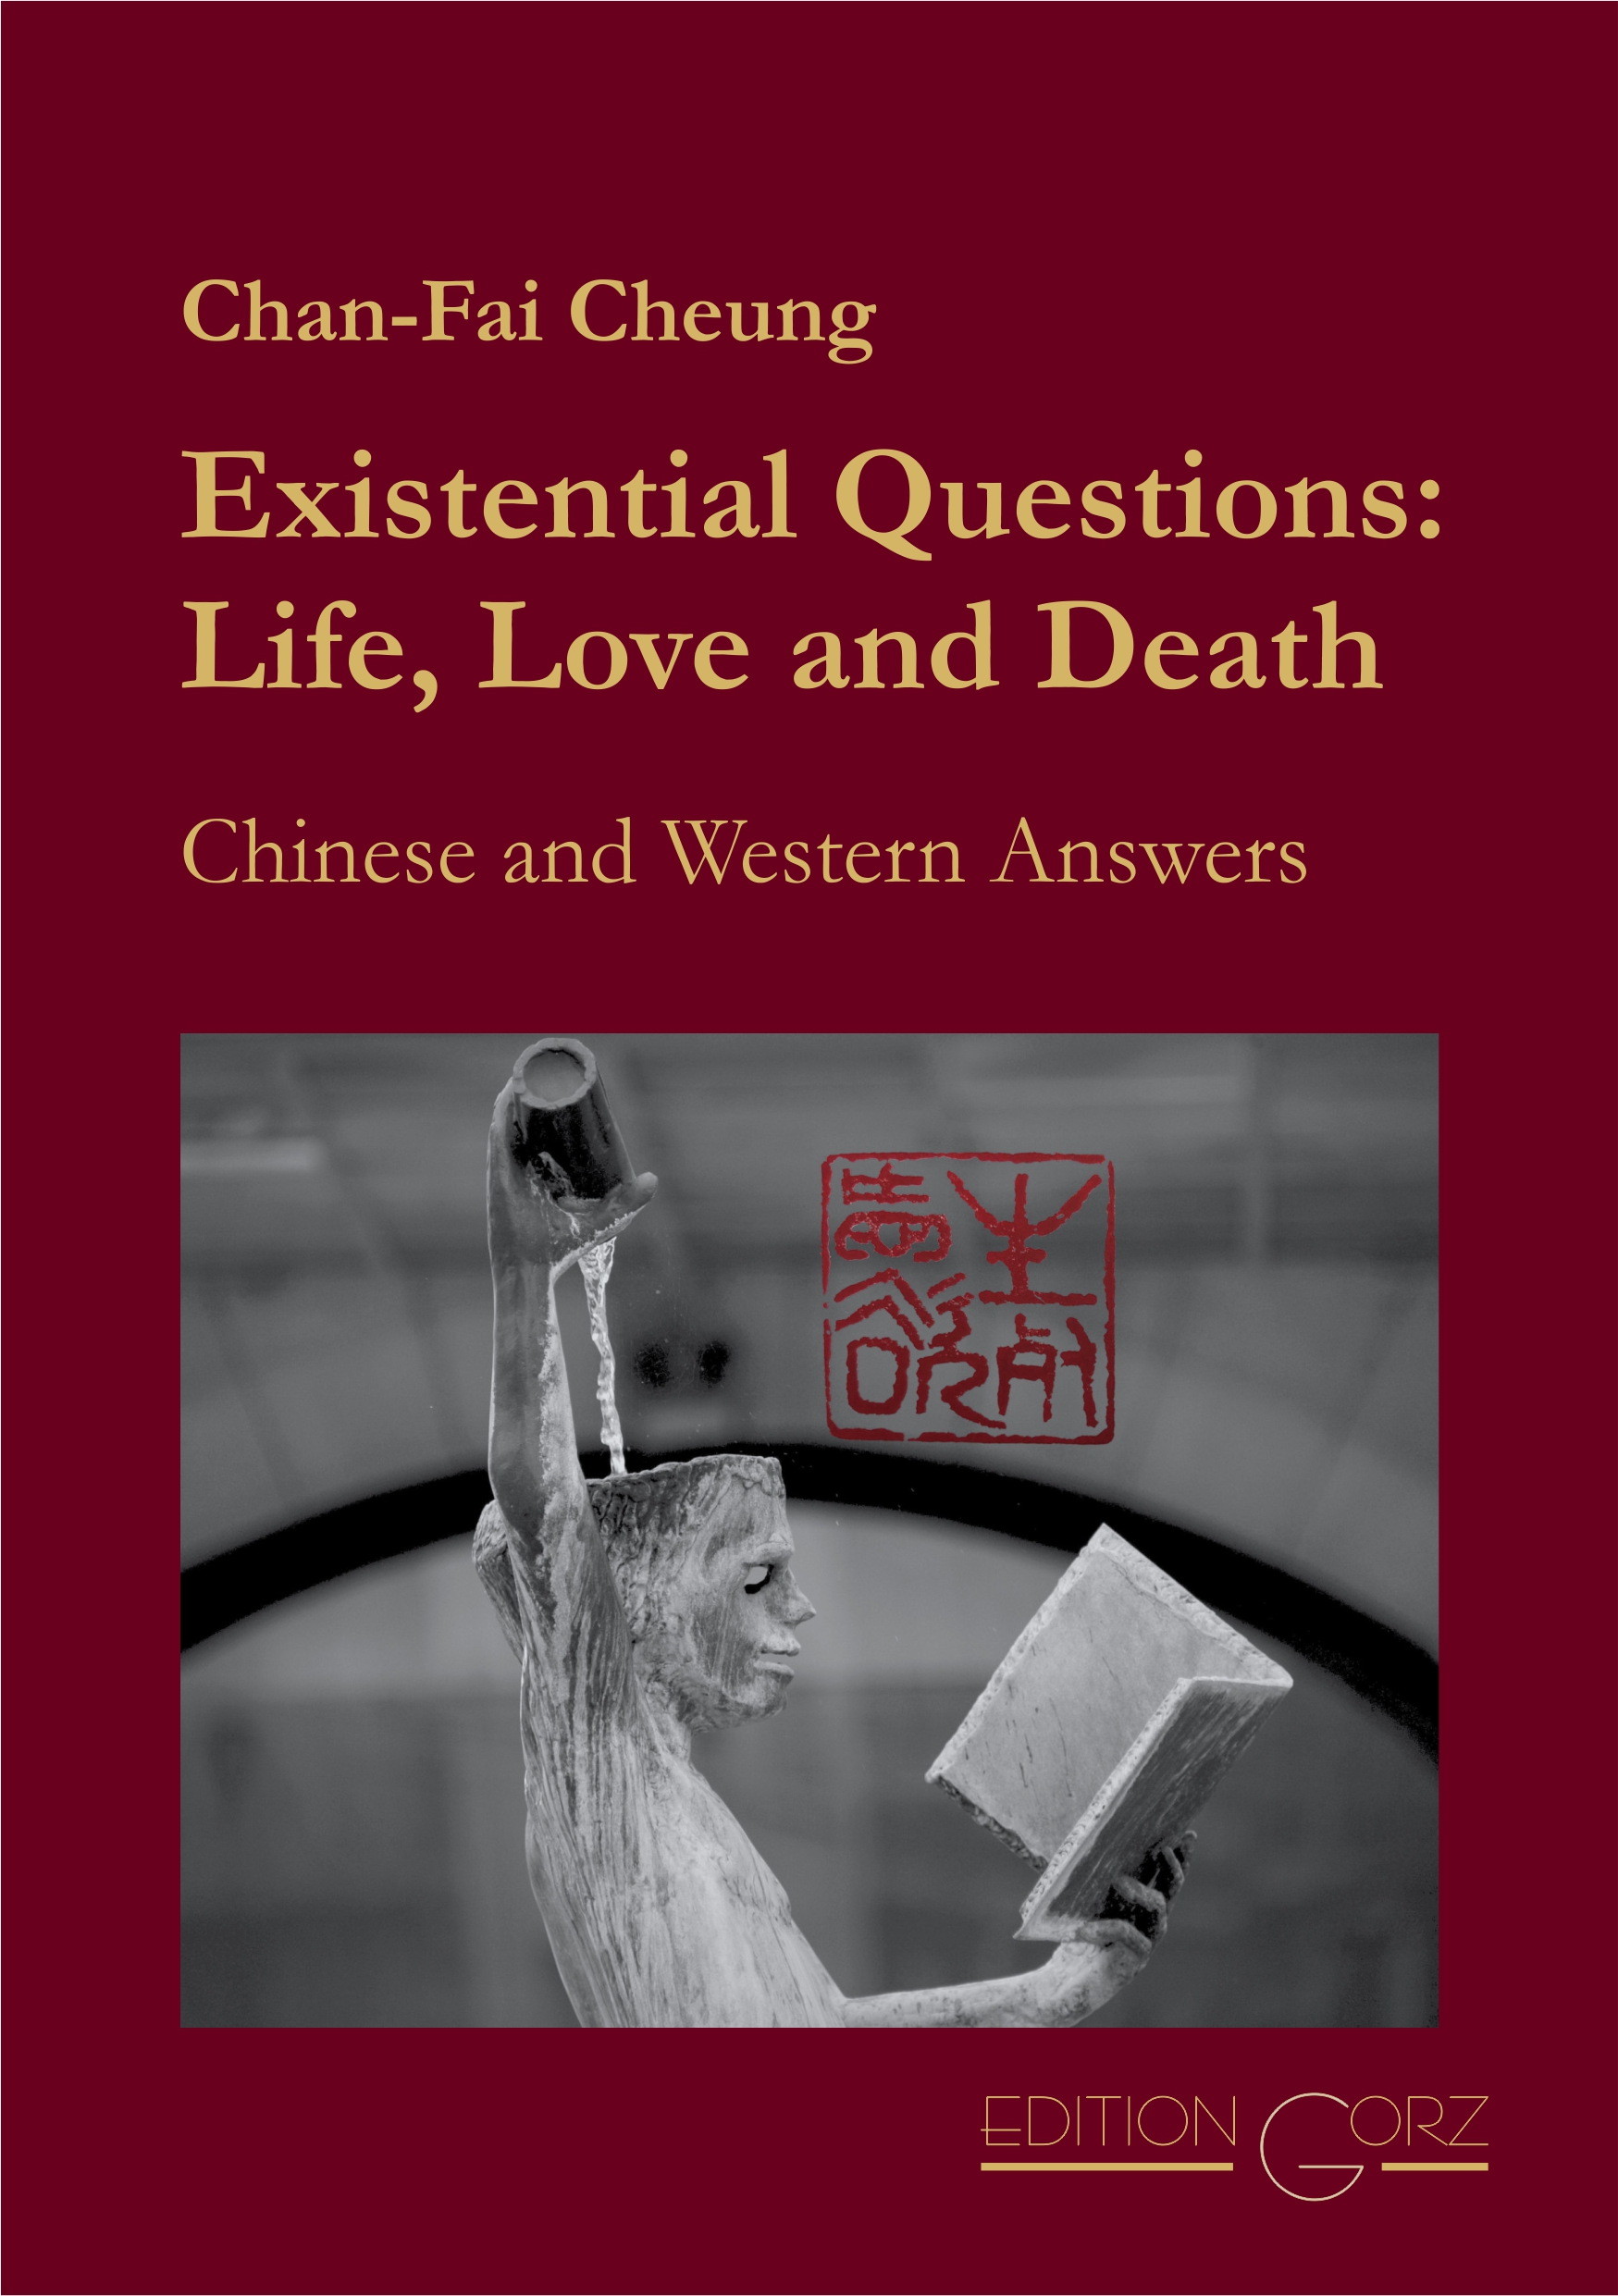 Cheung, Existential Questions